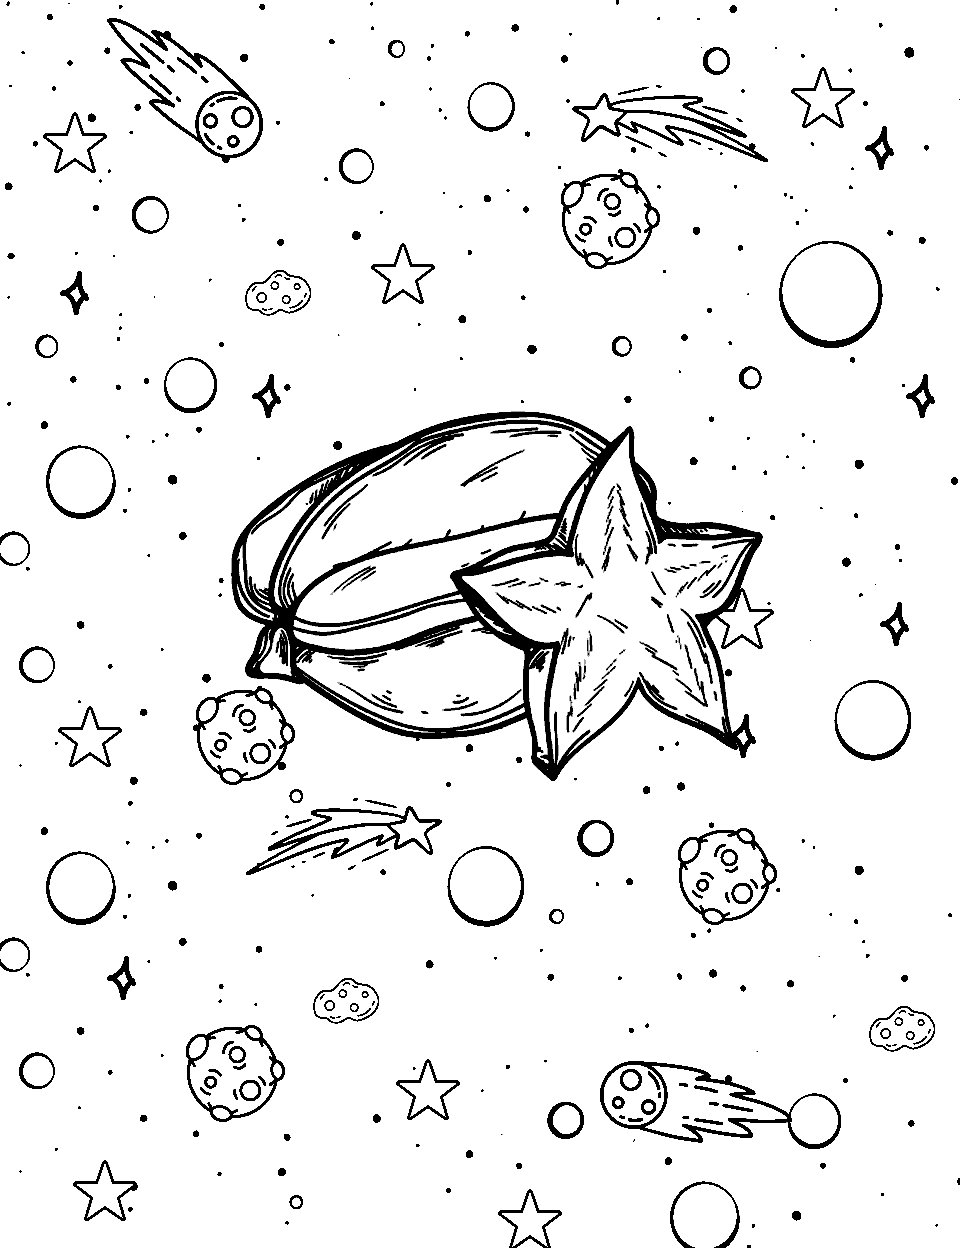 Starfruit in Space Fruit Coloring Page - A starfruit floating in space with stars around it.